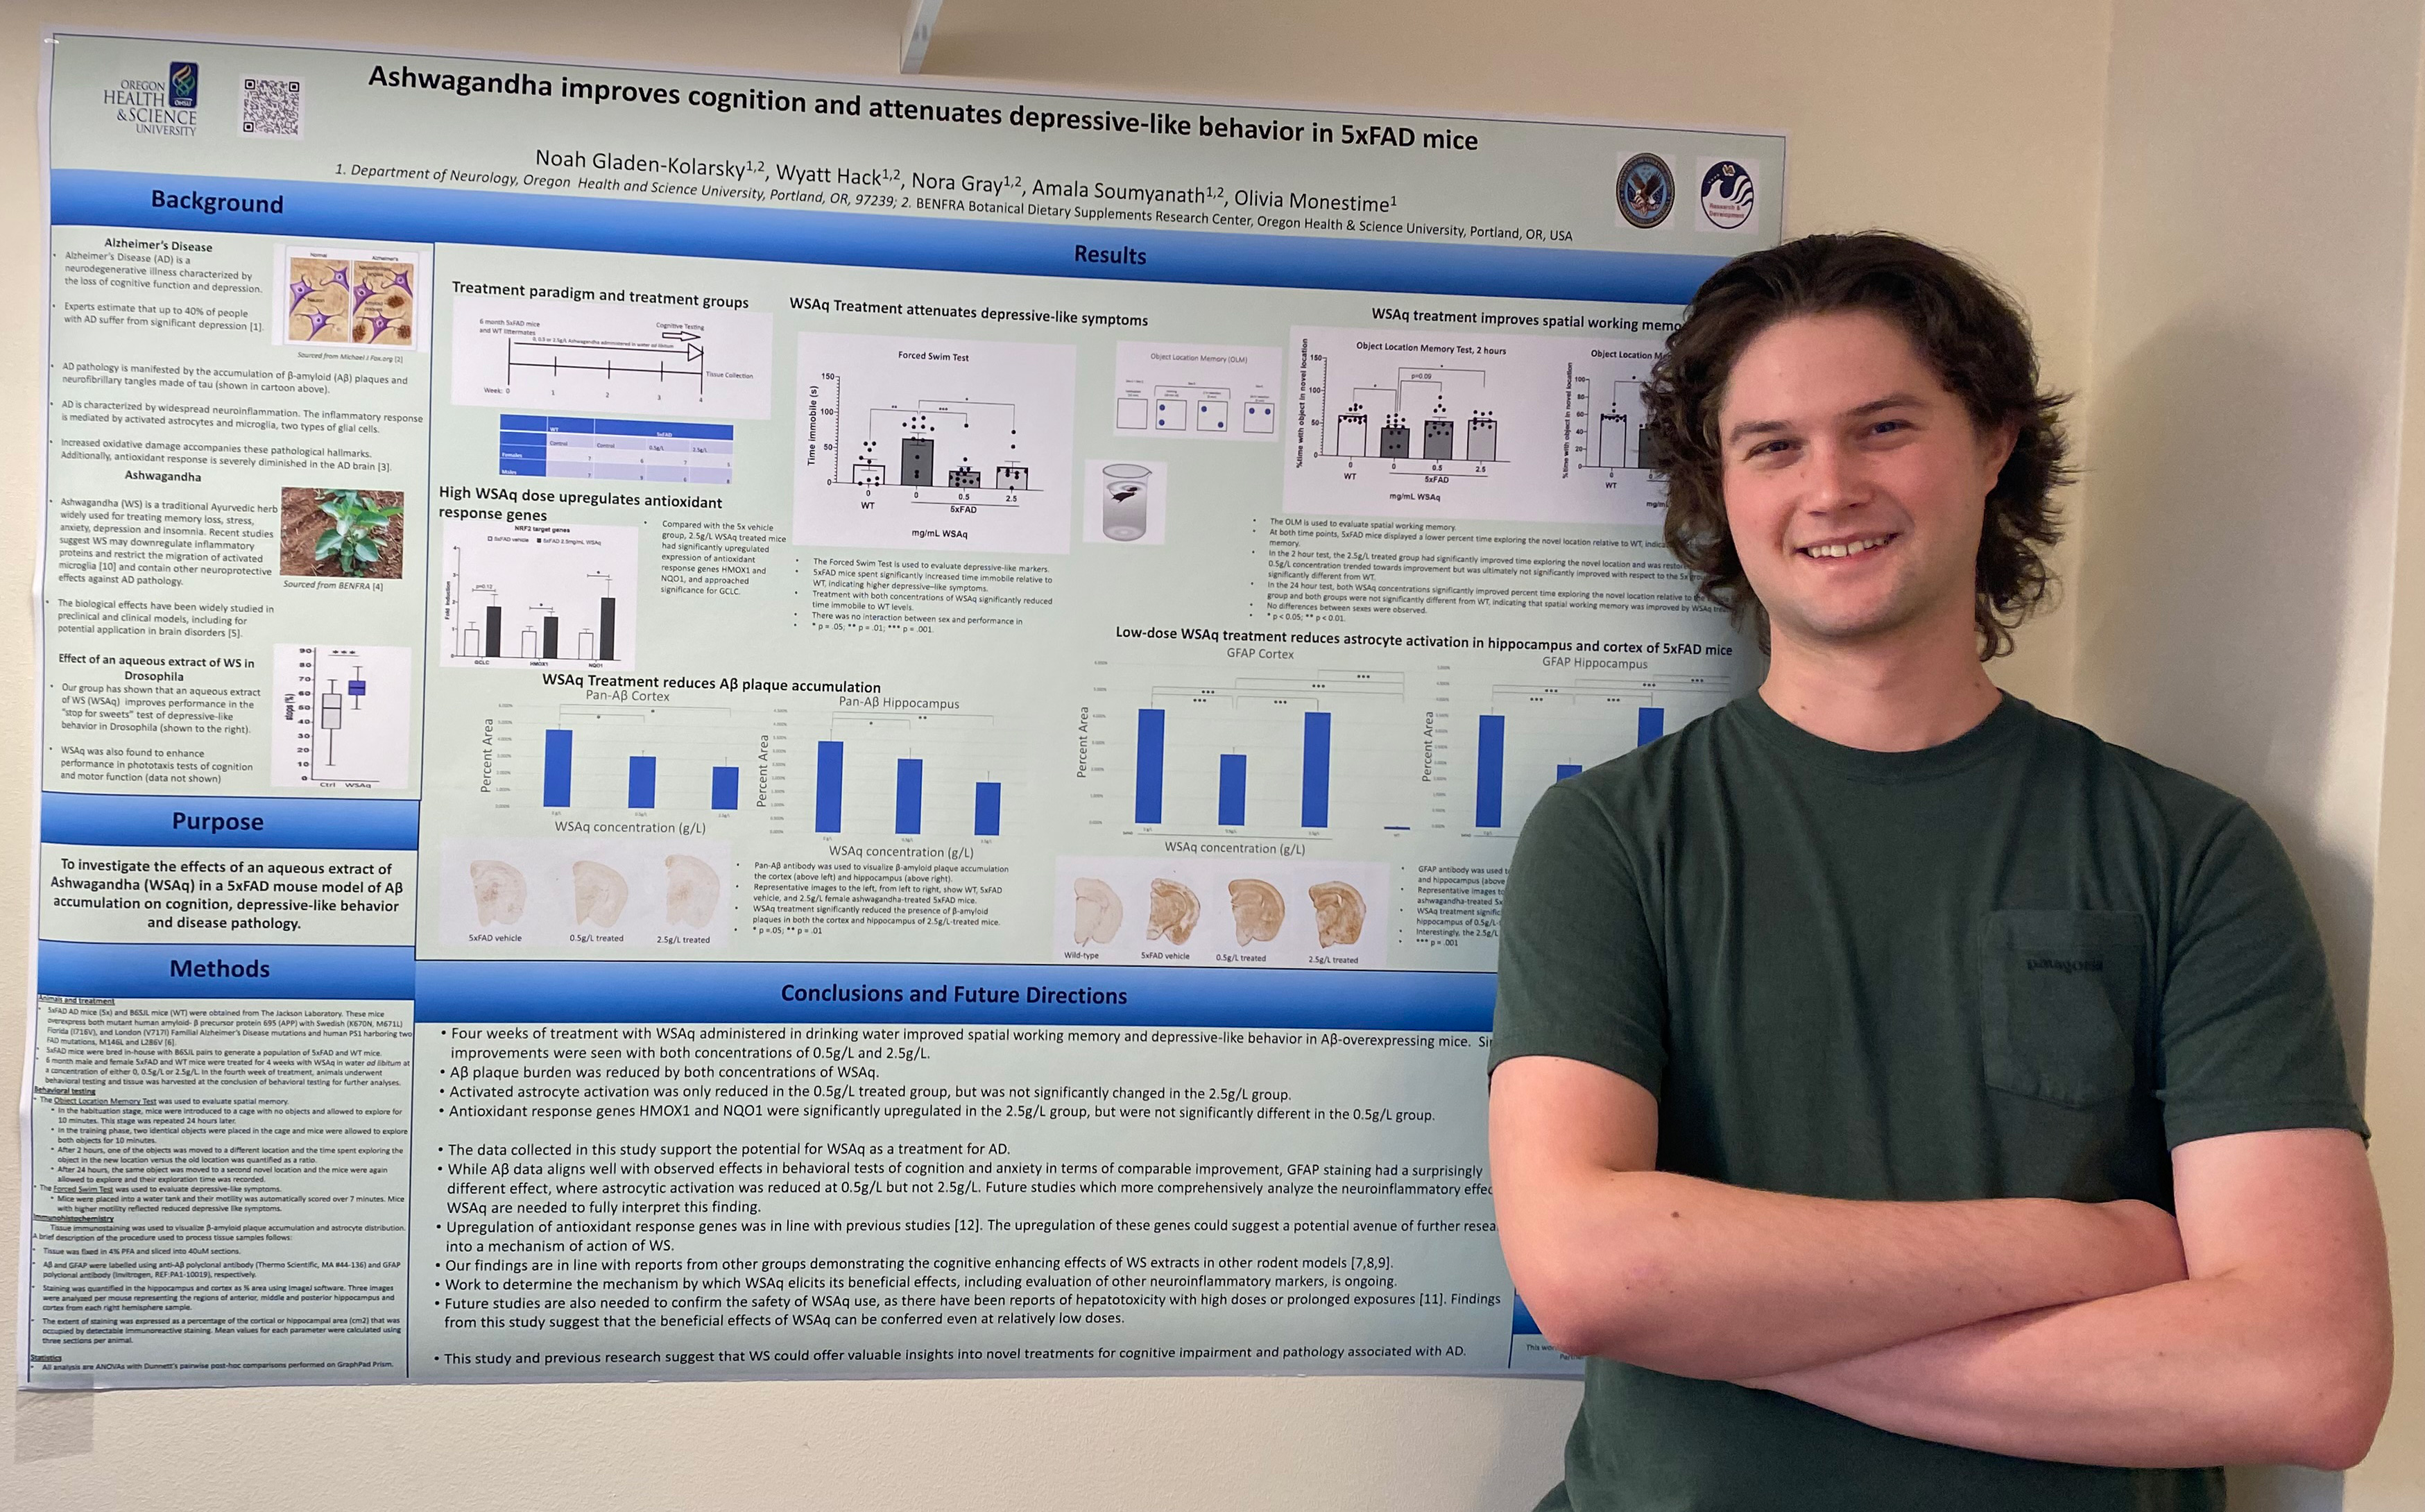   Noah Gladen Kolarksy presenting a  poster on  effects of Ashwagandha in a mouse model of Alzheimer's Disease